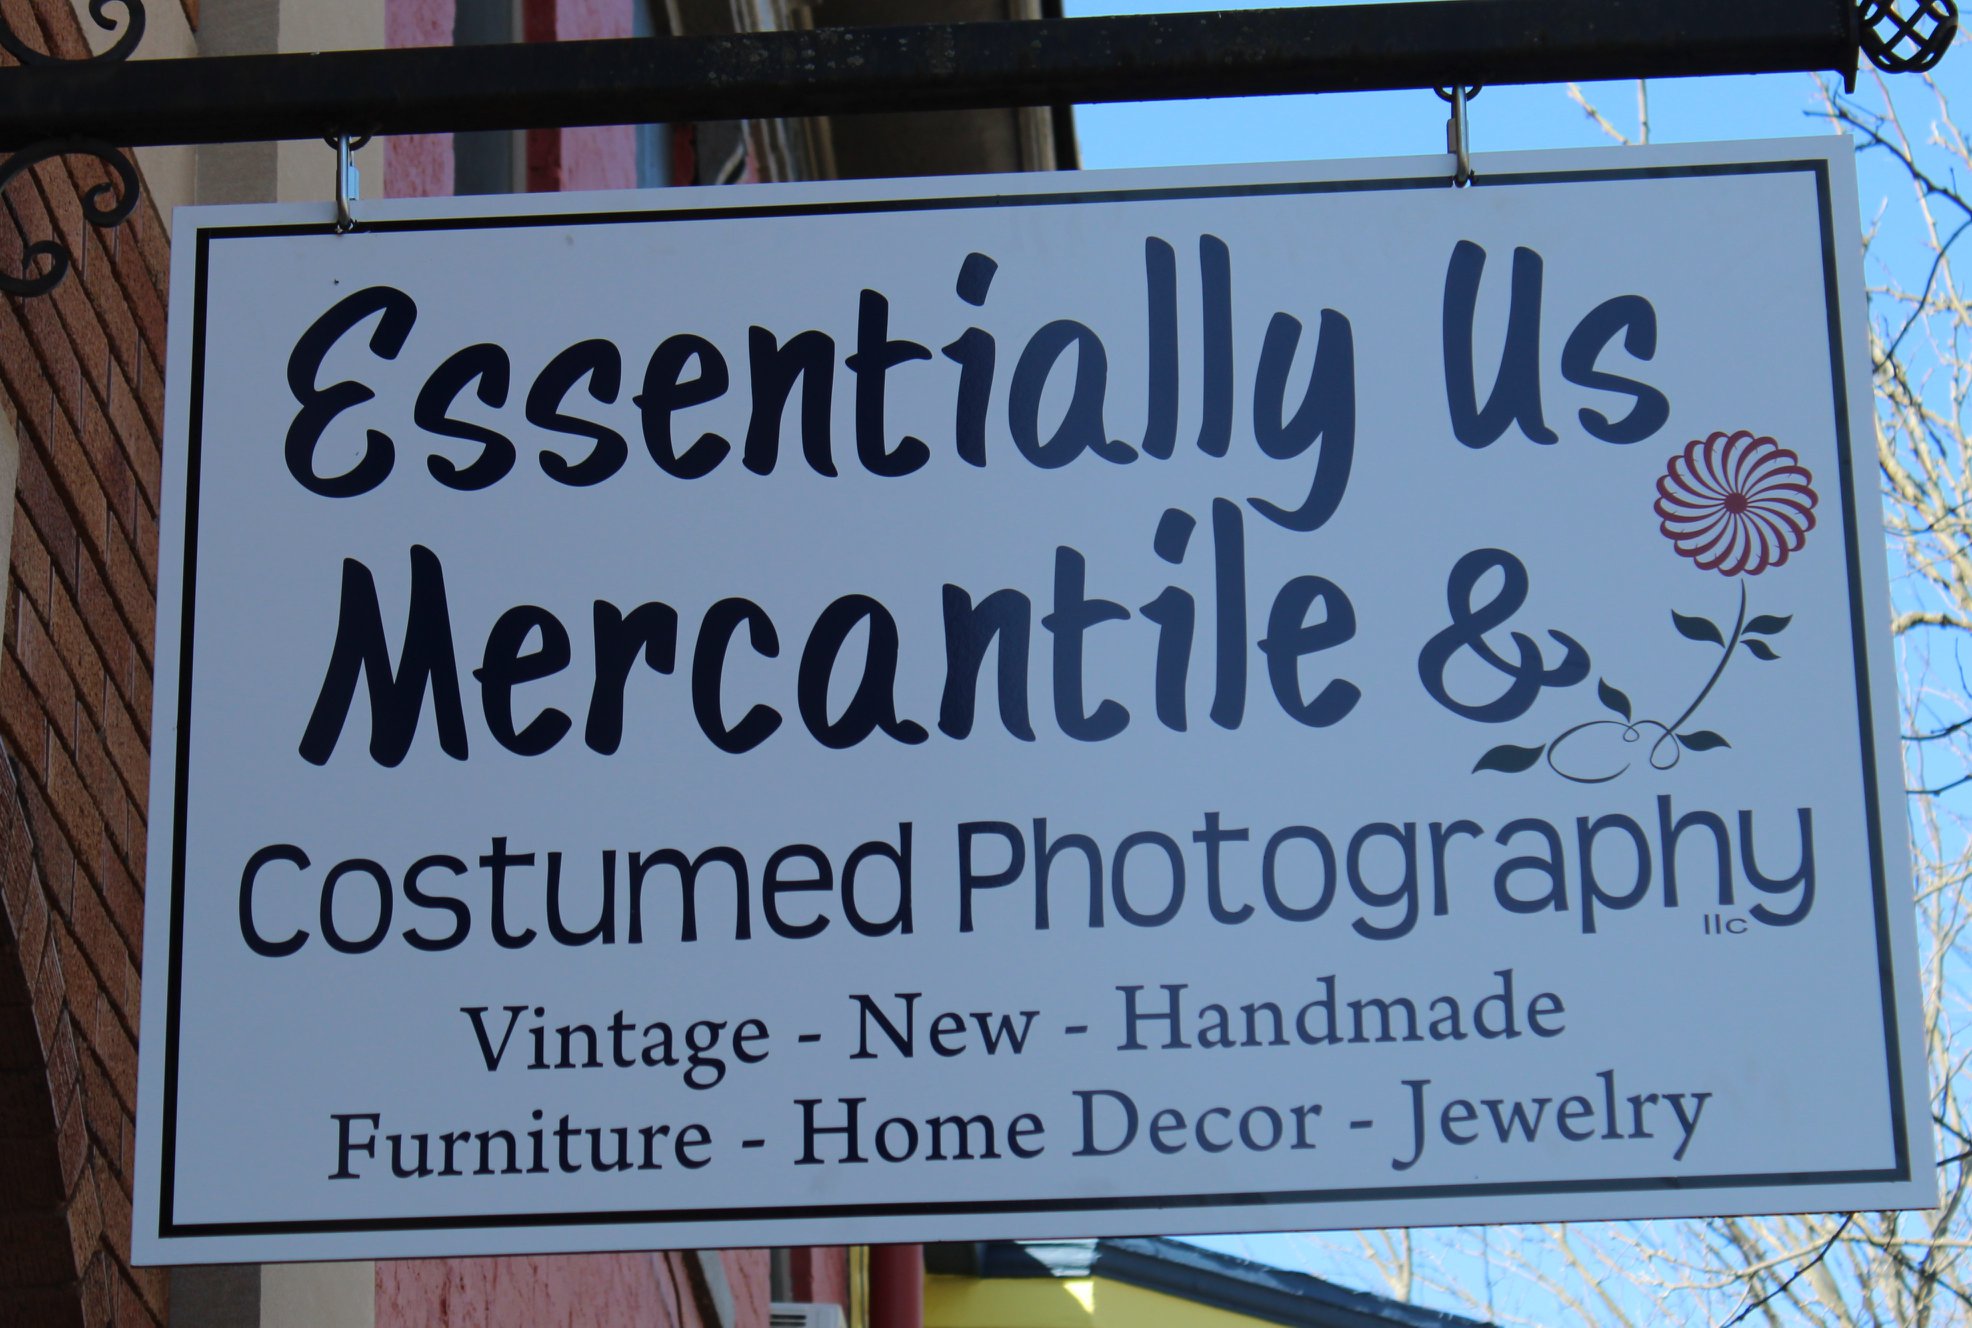 Essentially Us Mercantile & Costume Photography